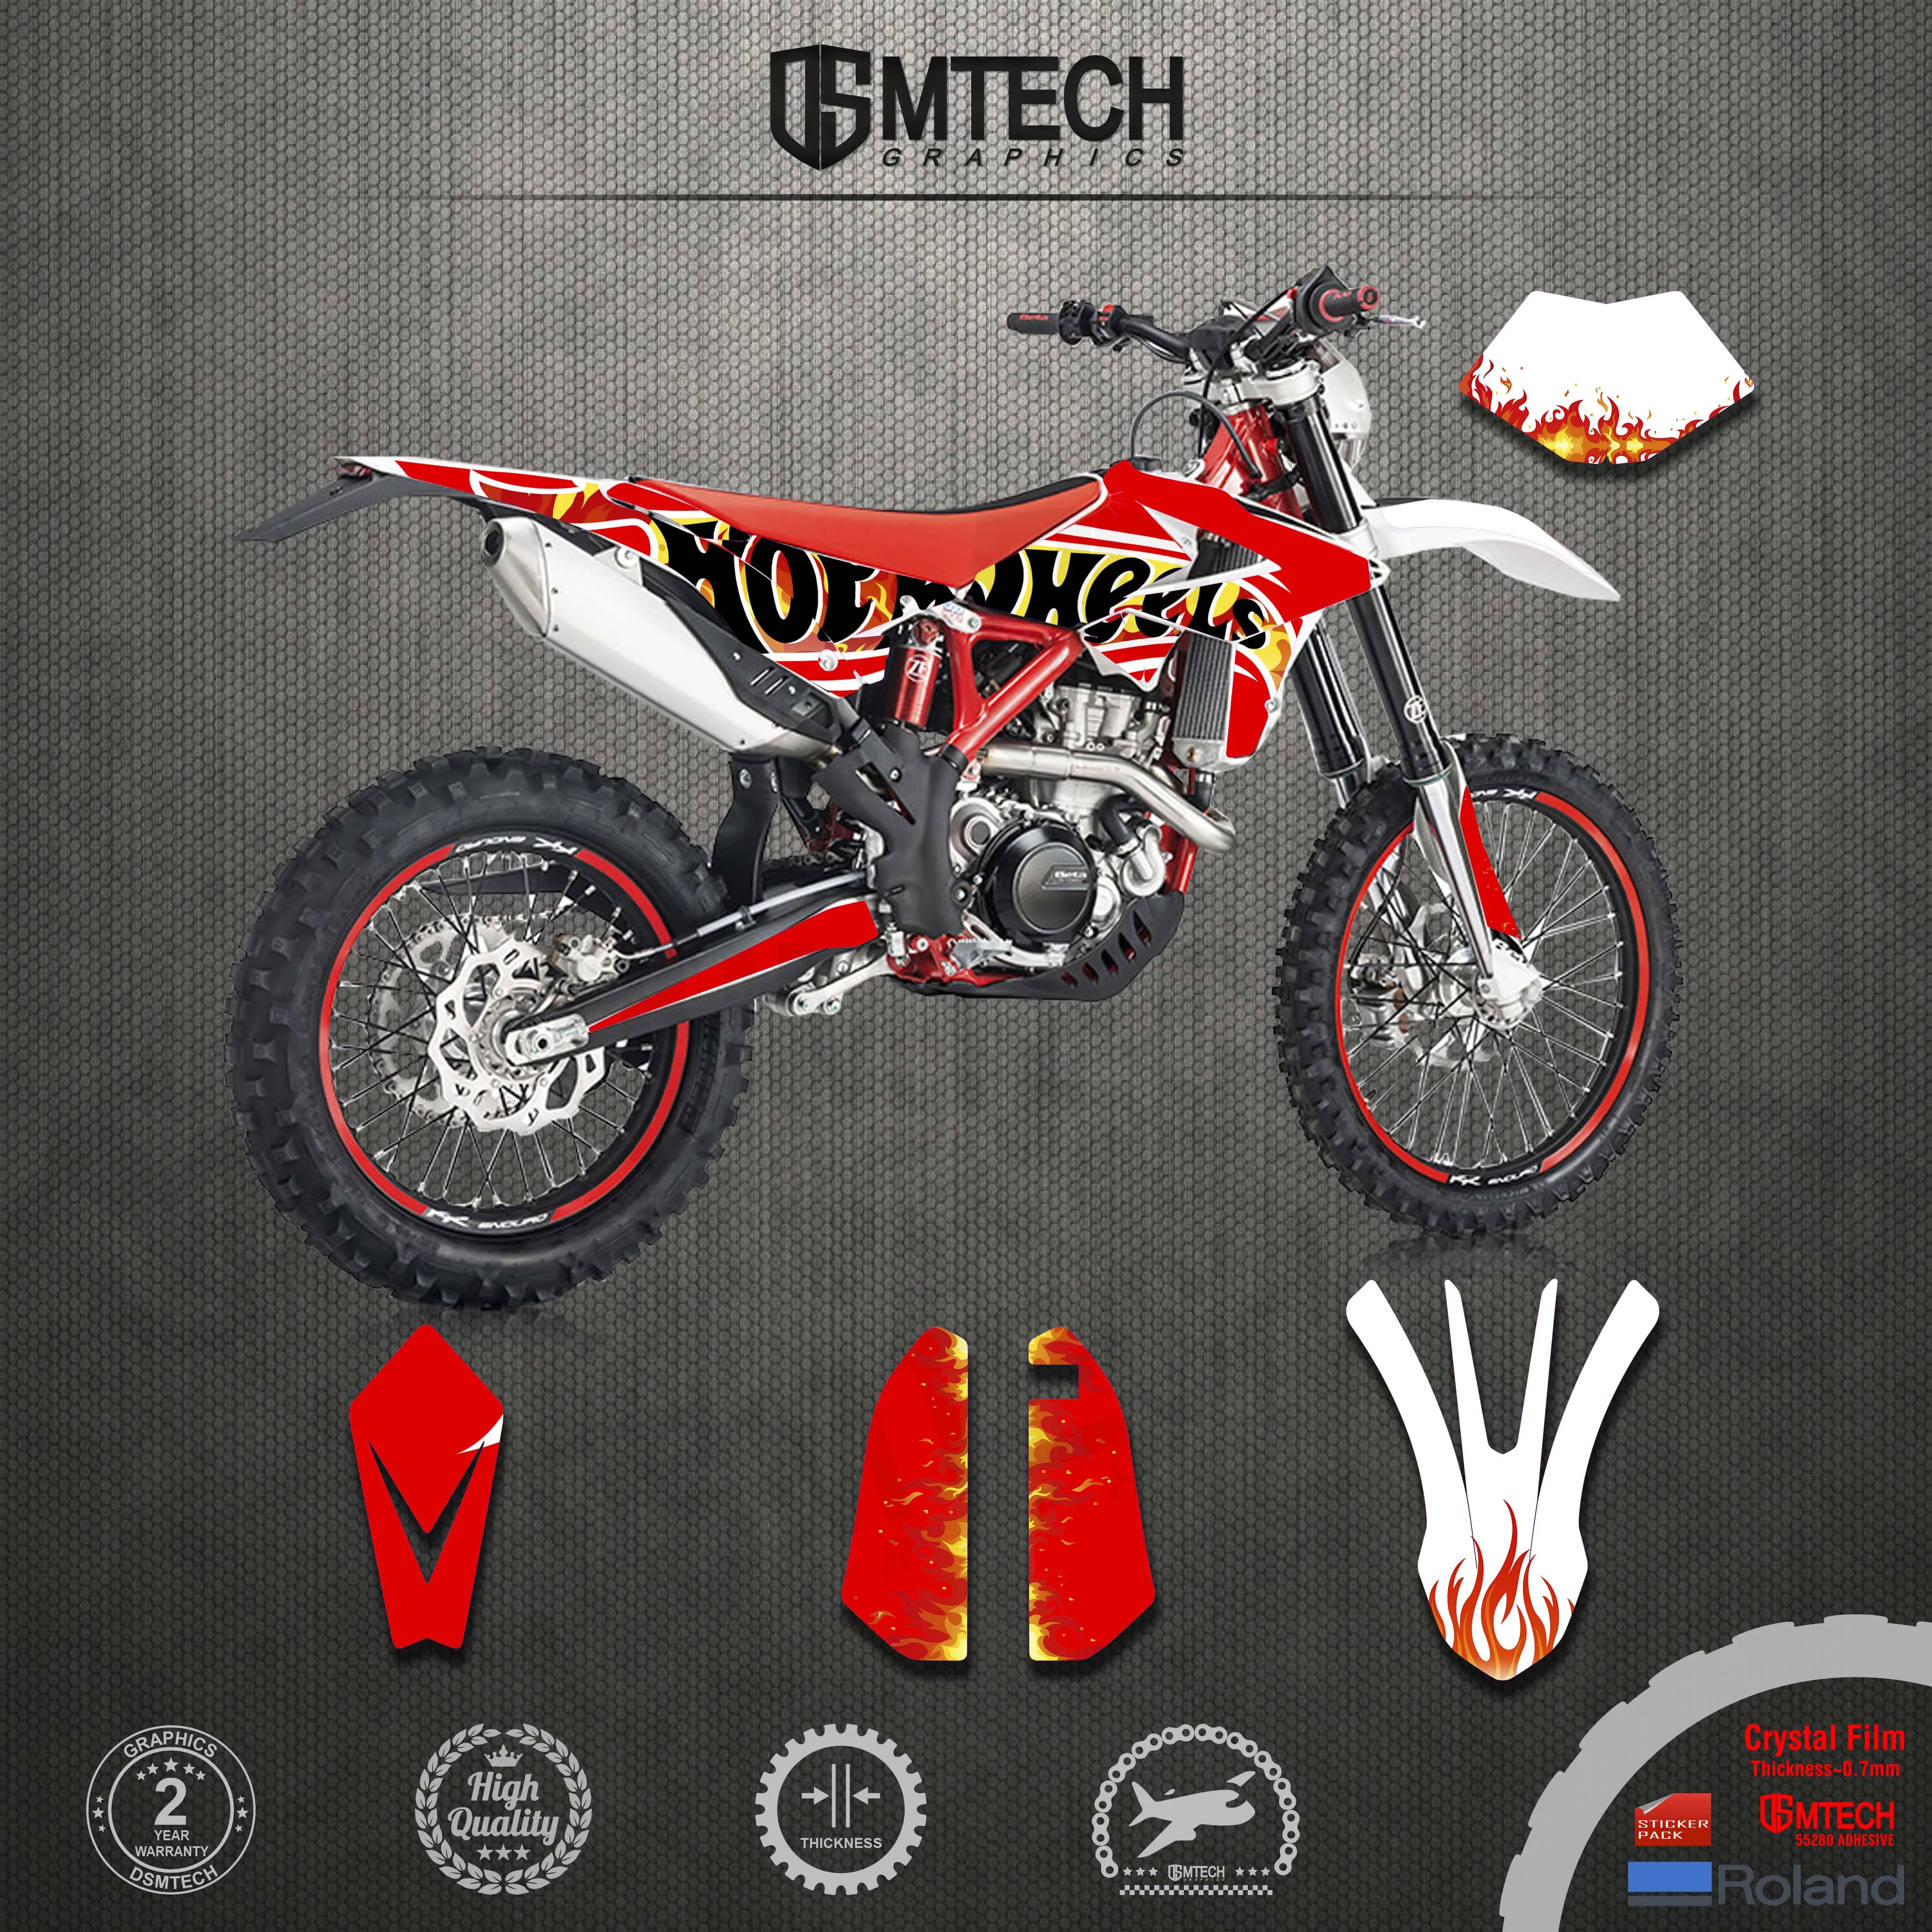 DSMTECH  Motorcycle Full Set Graphics  Decal Sticker Deco Kit For Beta RR 125 250 300 430 2018 2019  Graphics